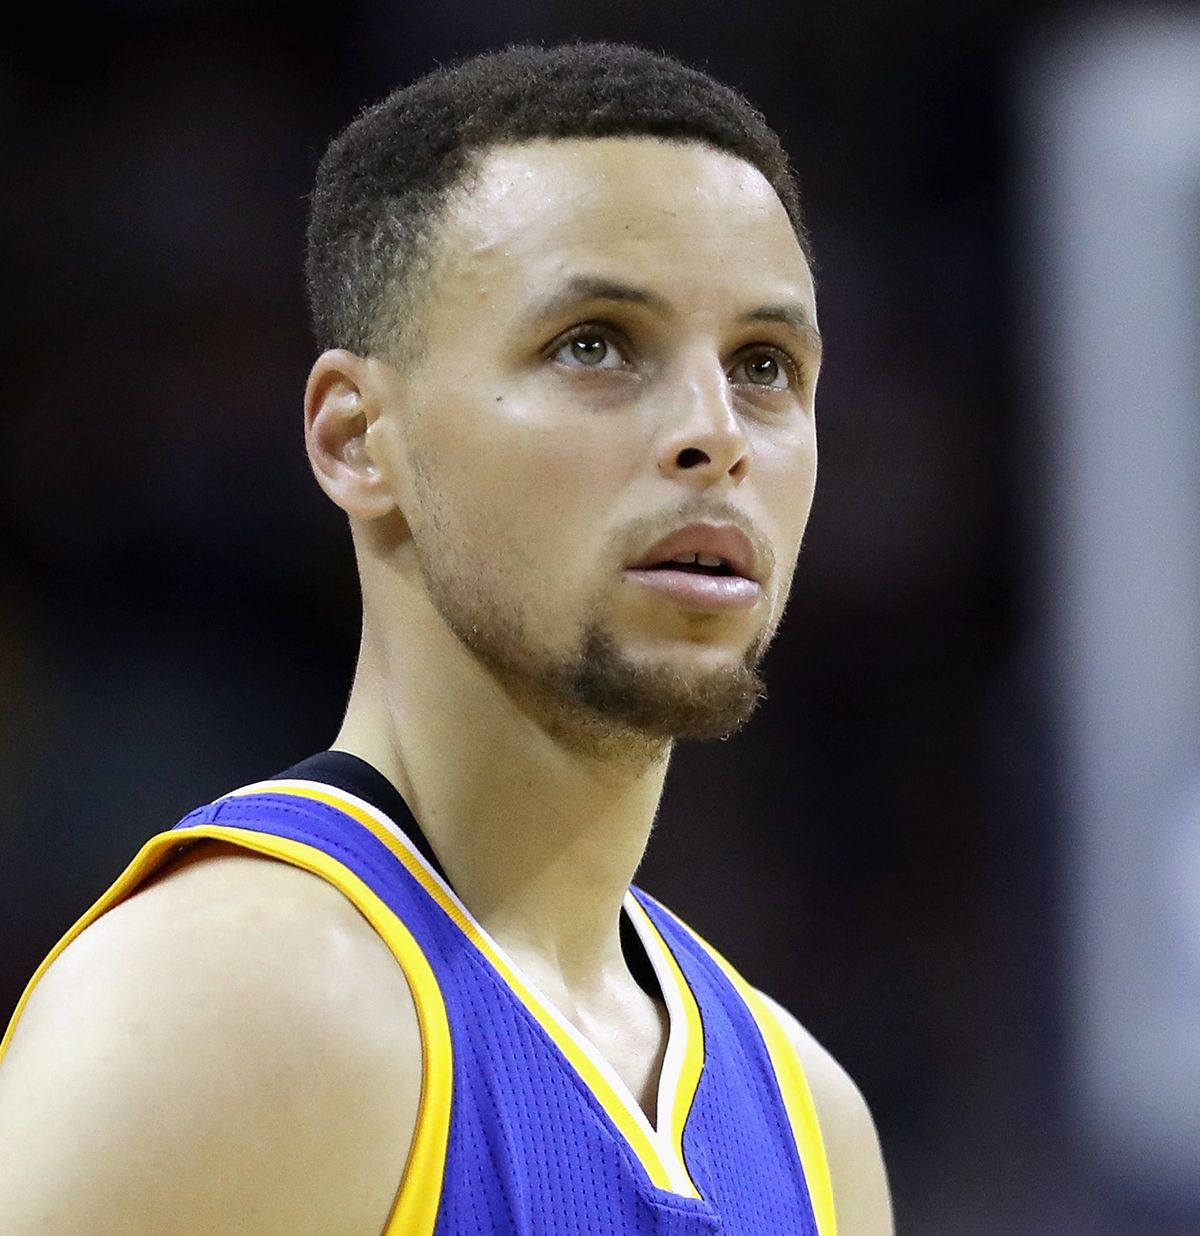 stephen curry photo via getty images